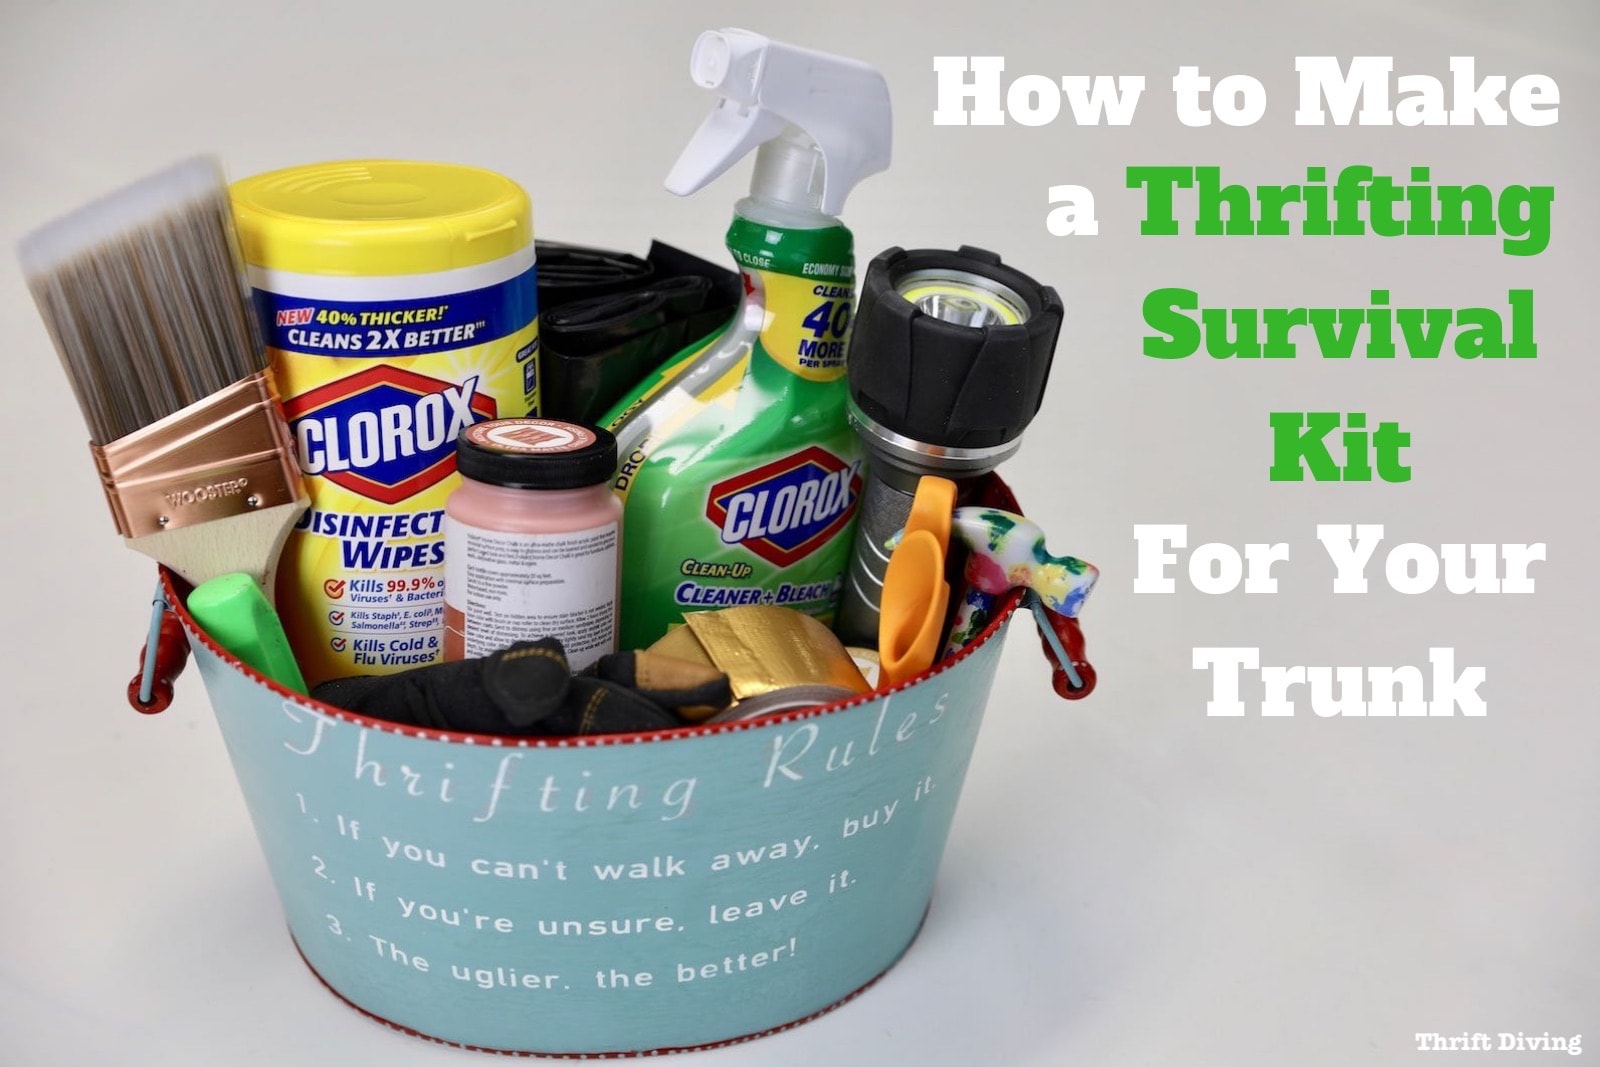 How to Make a Thrifting Survival Kit for your Trunk - Thrift Diving